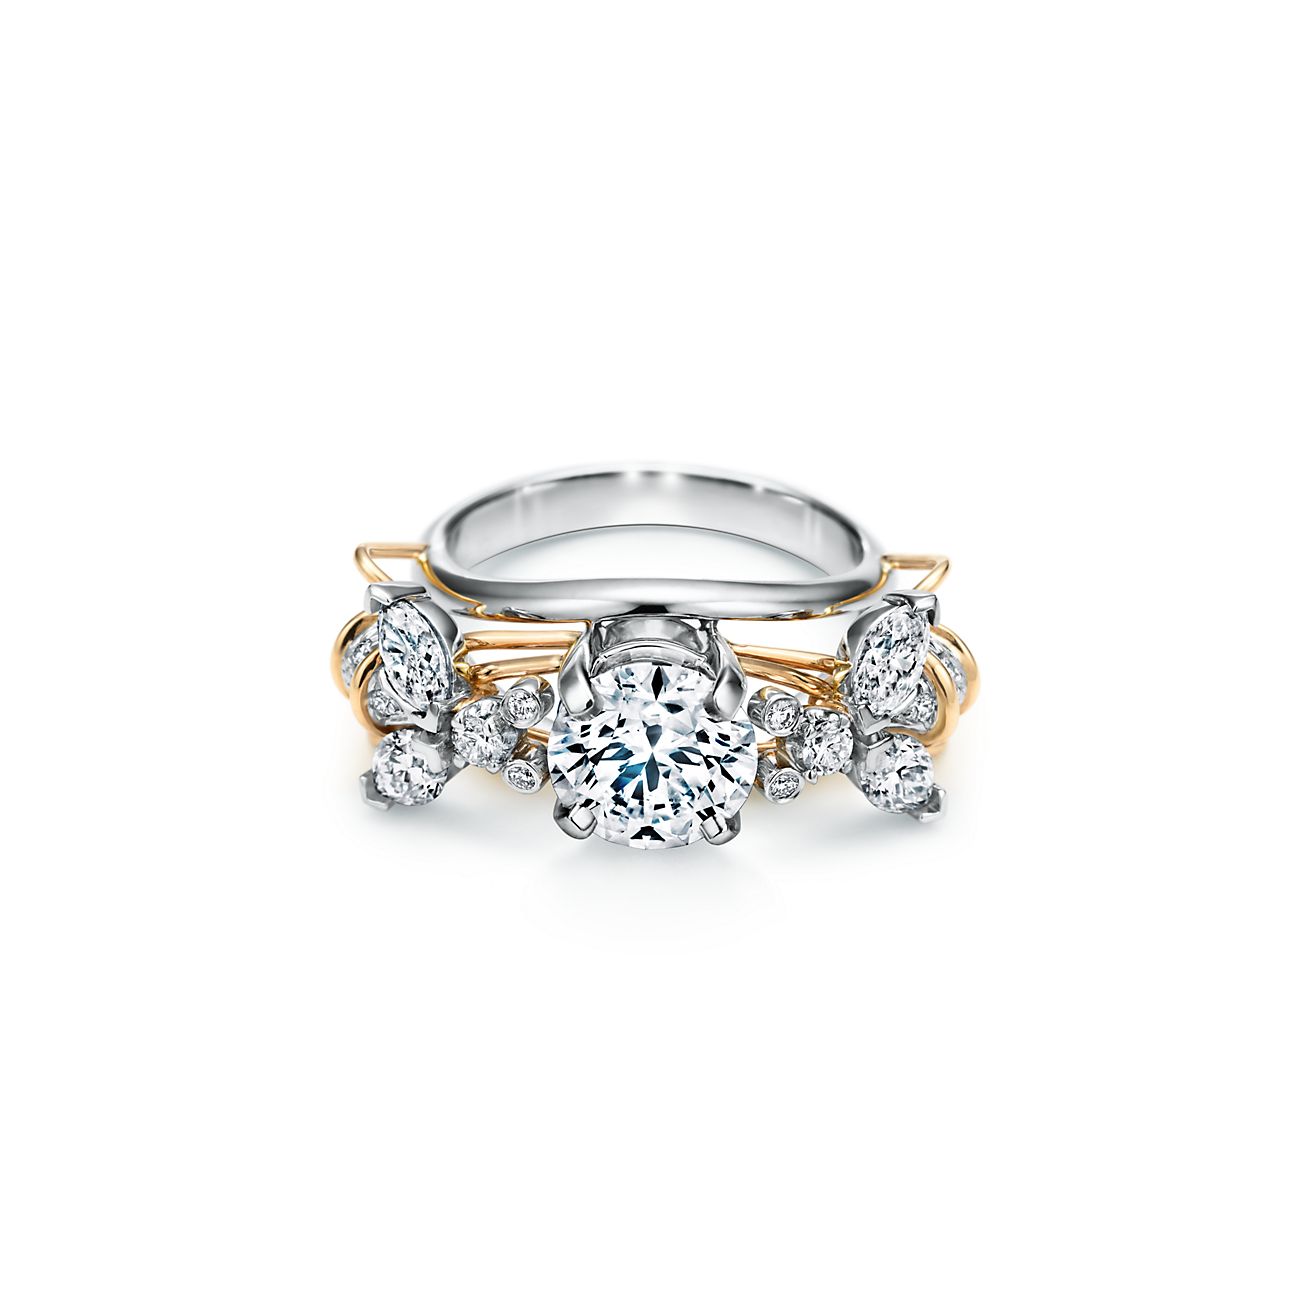 Tiffany Together Milgrain Band Ring in Platinum, 3 mm Wide | Tiffany & Co.